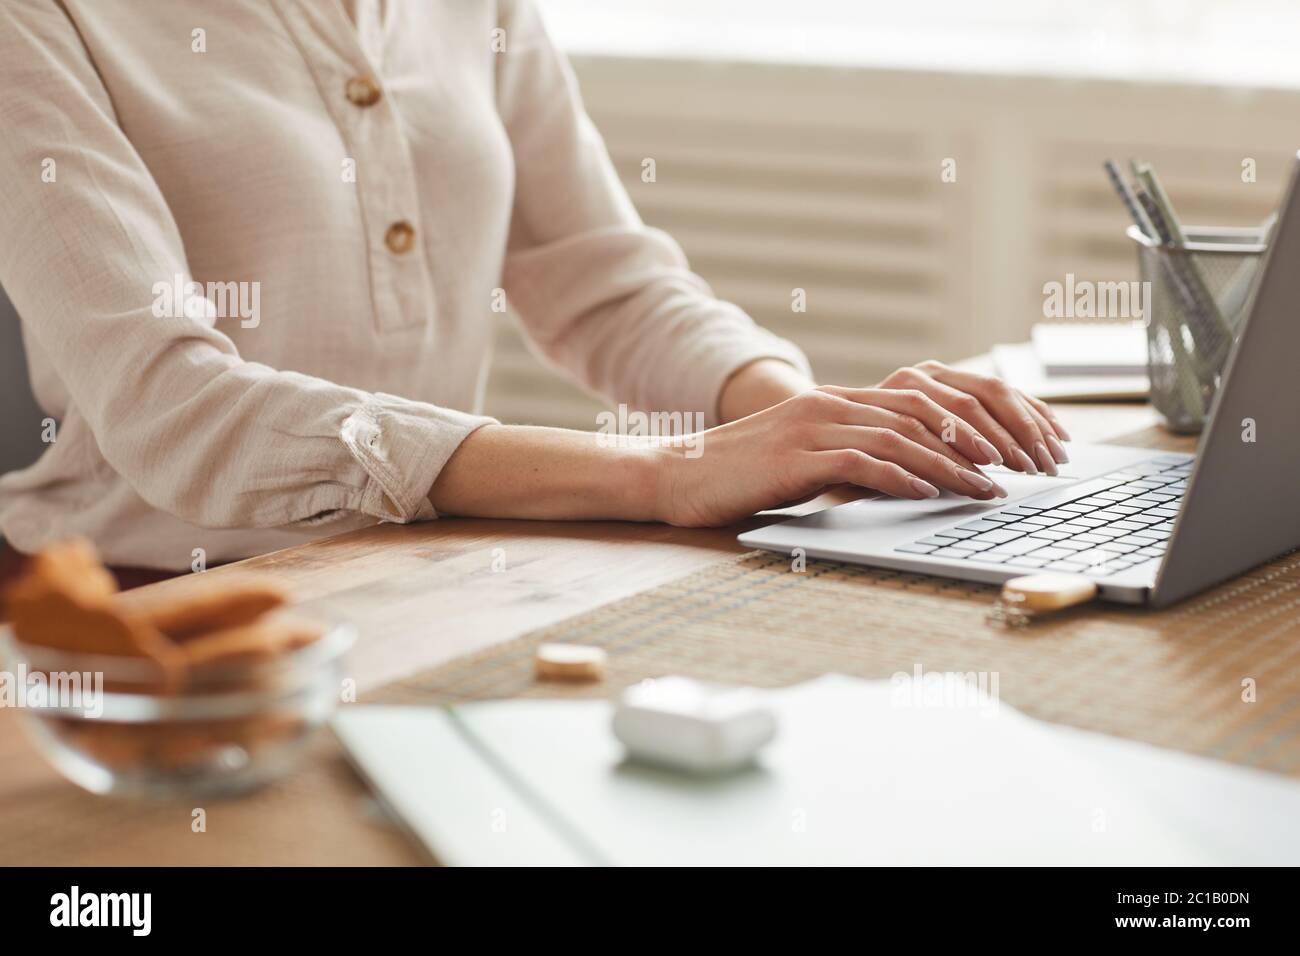 Warm-toned mid section portrait of unrecognizable woman typing on keyboard while working at home office, copy space Stock Photo